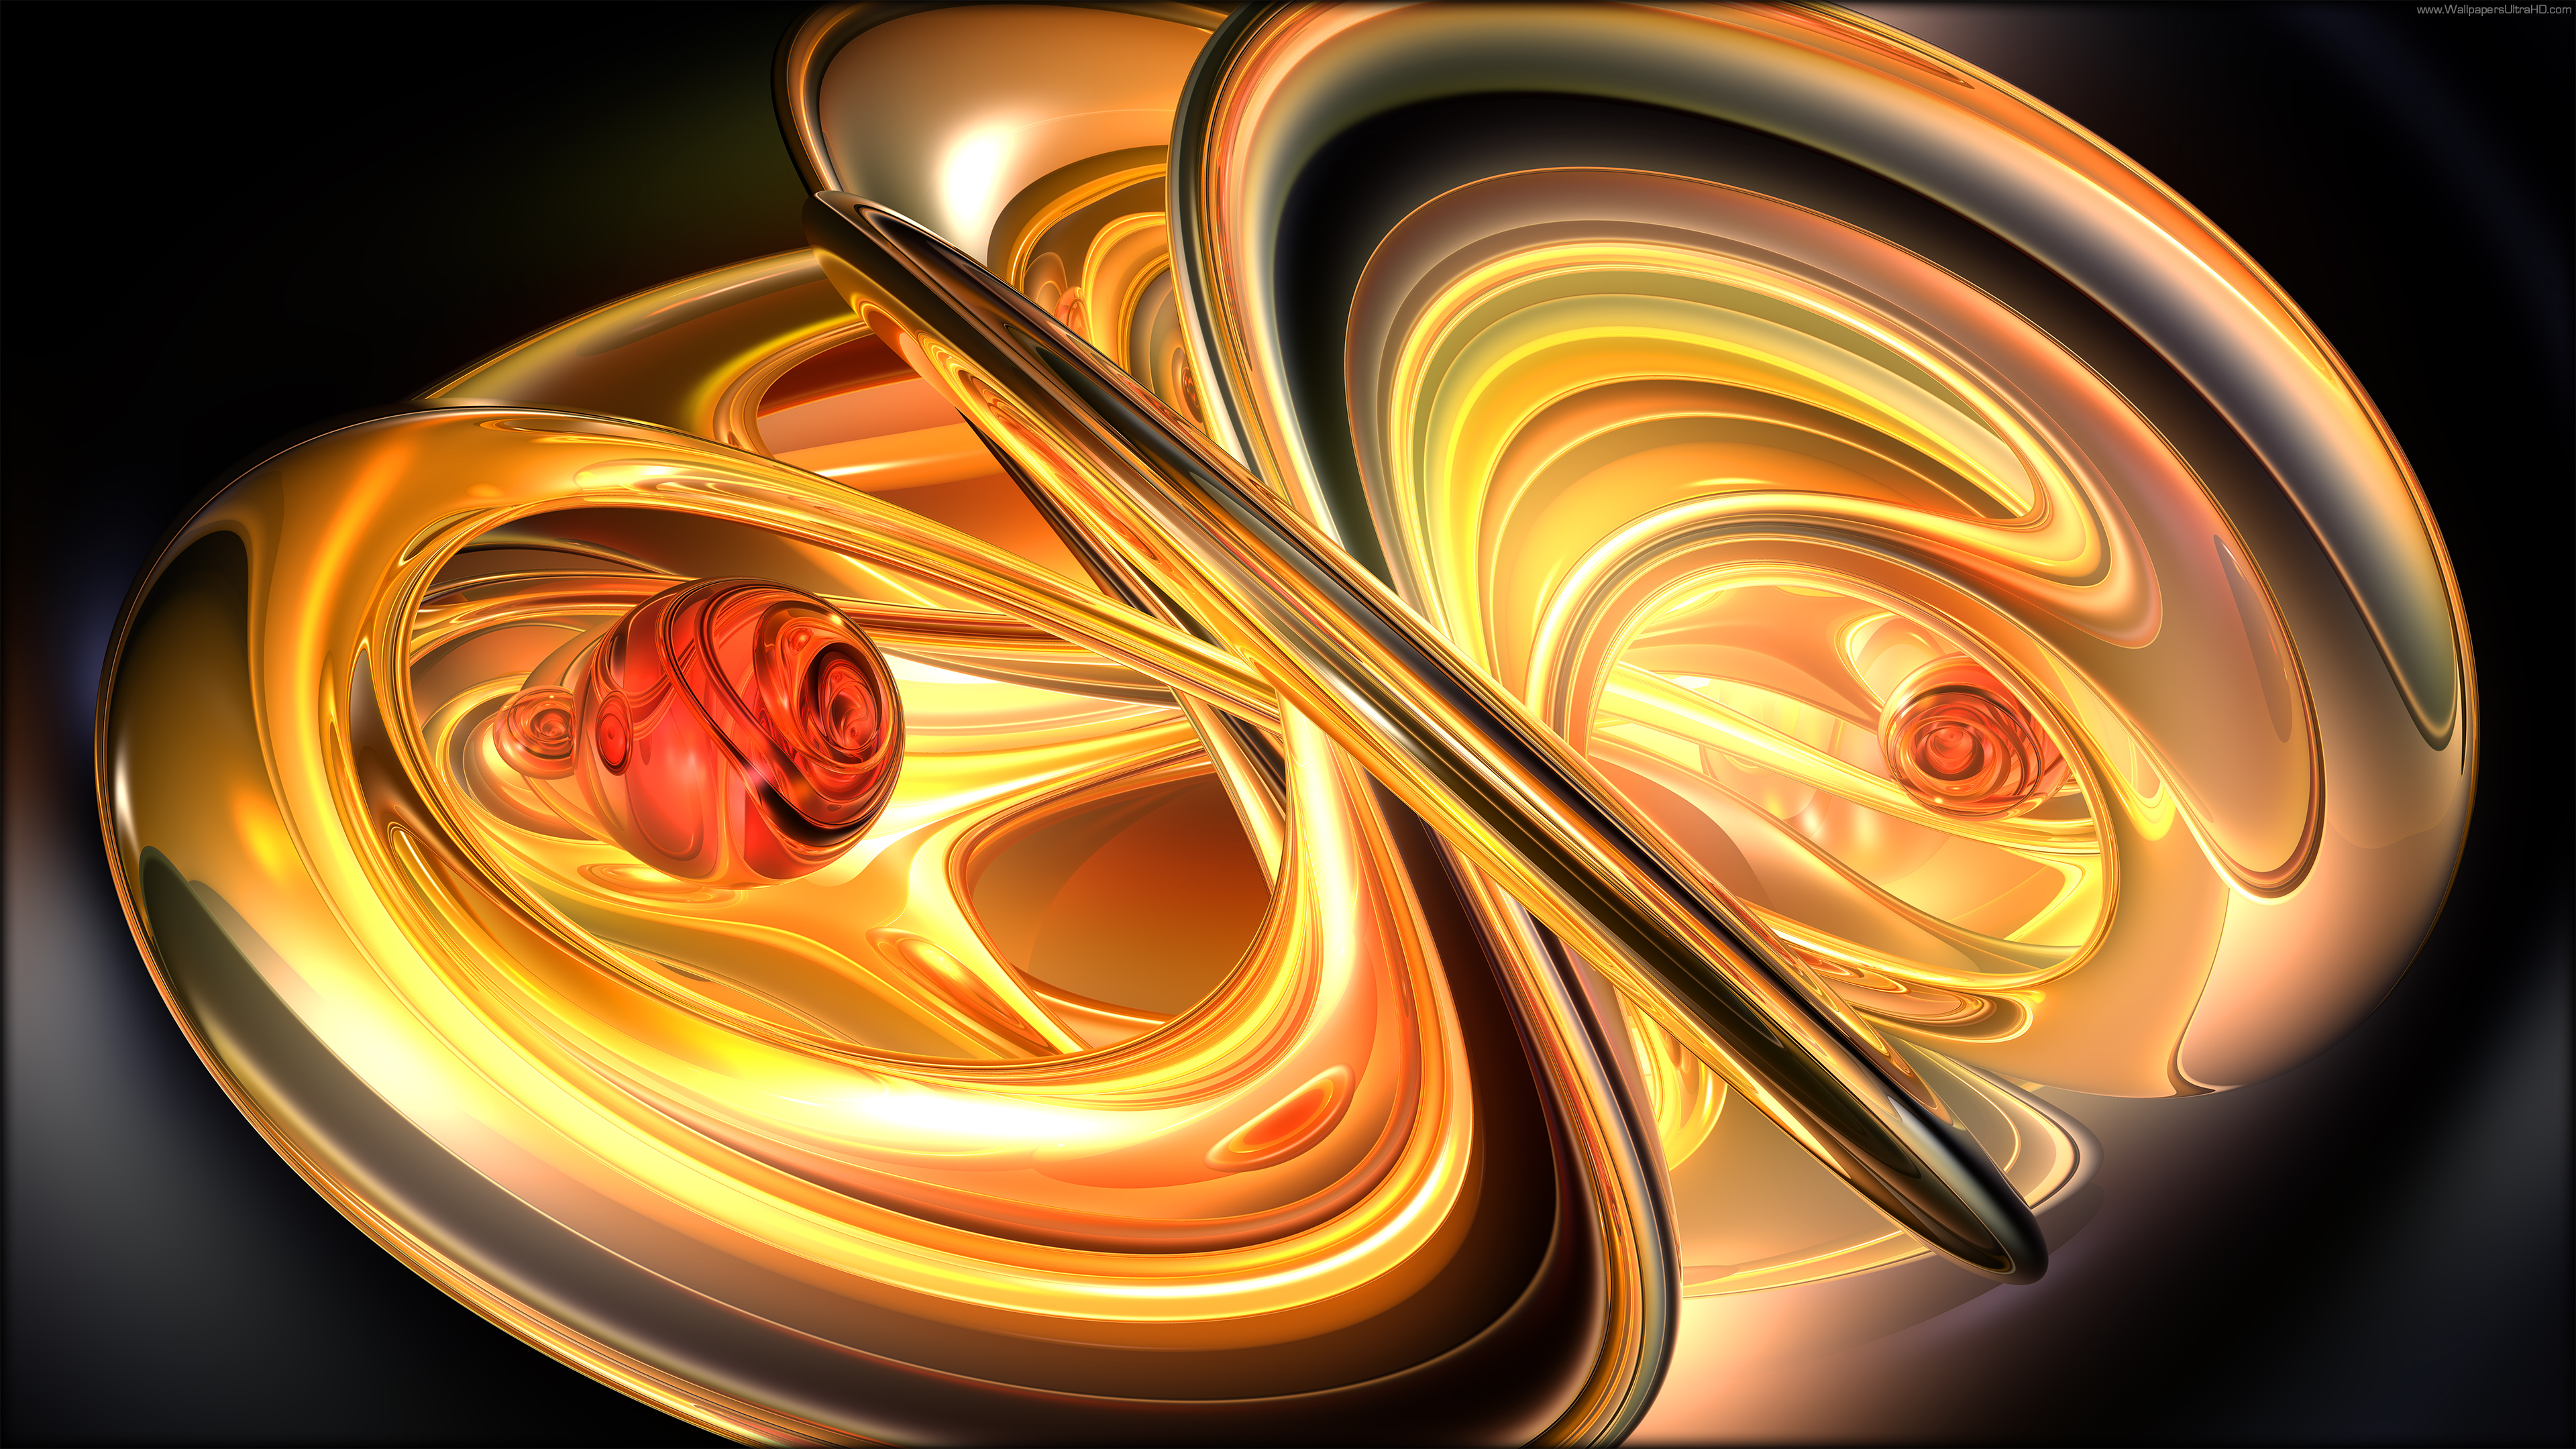 Ultra HD Wallpaper 4k 3d Red Abstraction Ball With Gold Rings